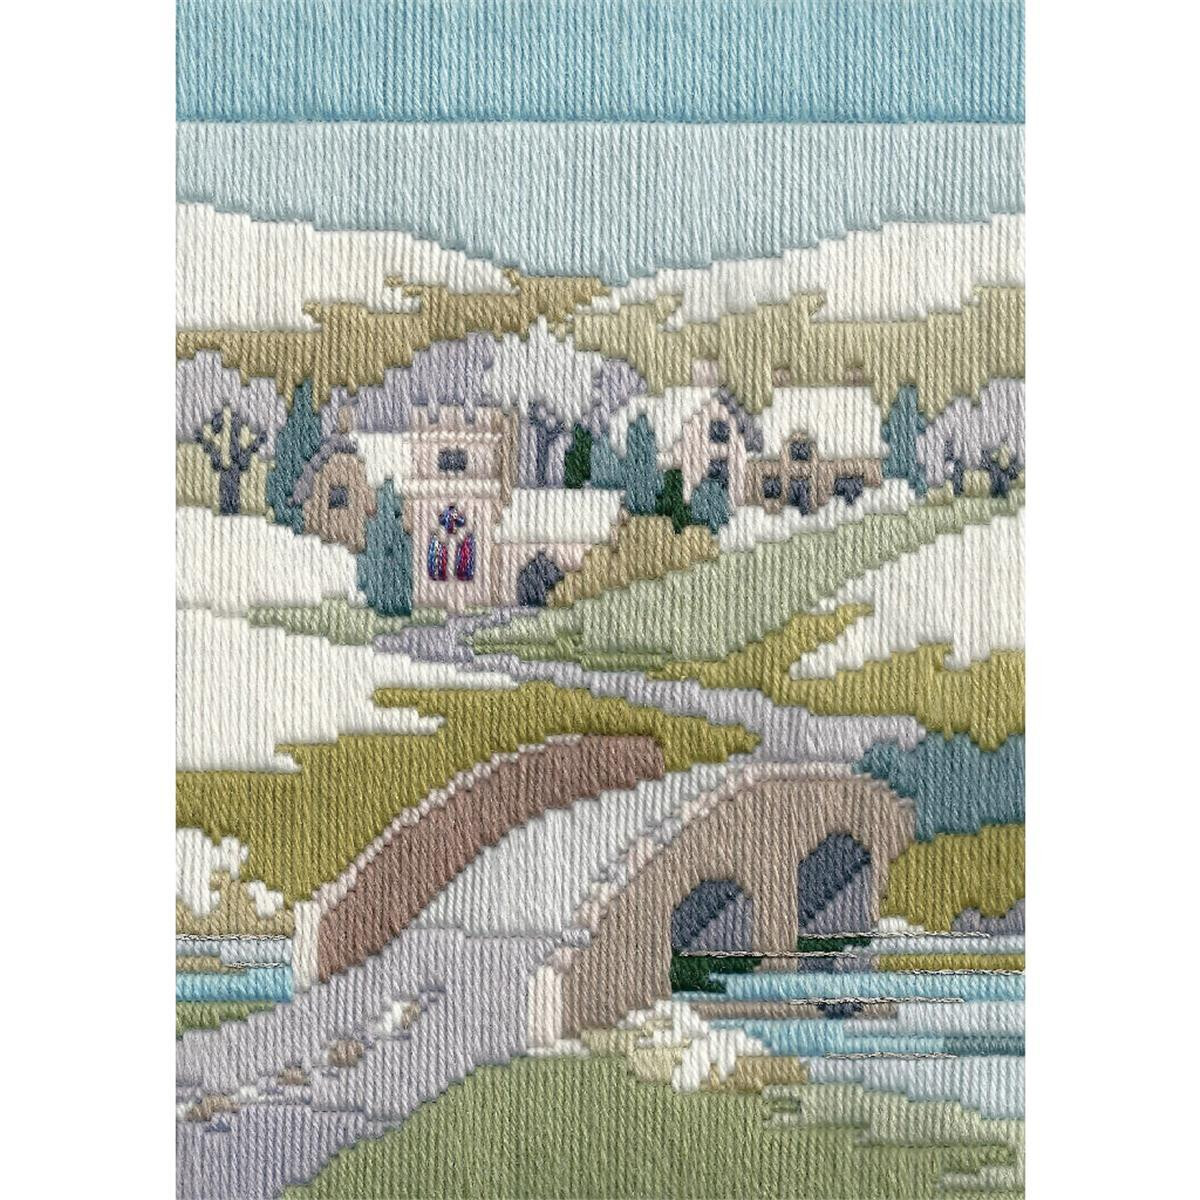 An embroidery pack from Bothy Threads shows a tranquil...